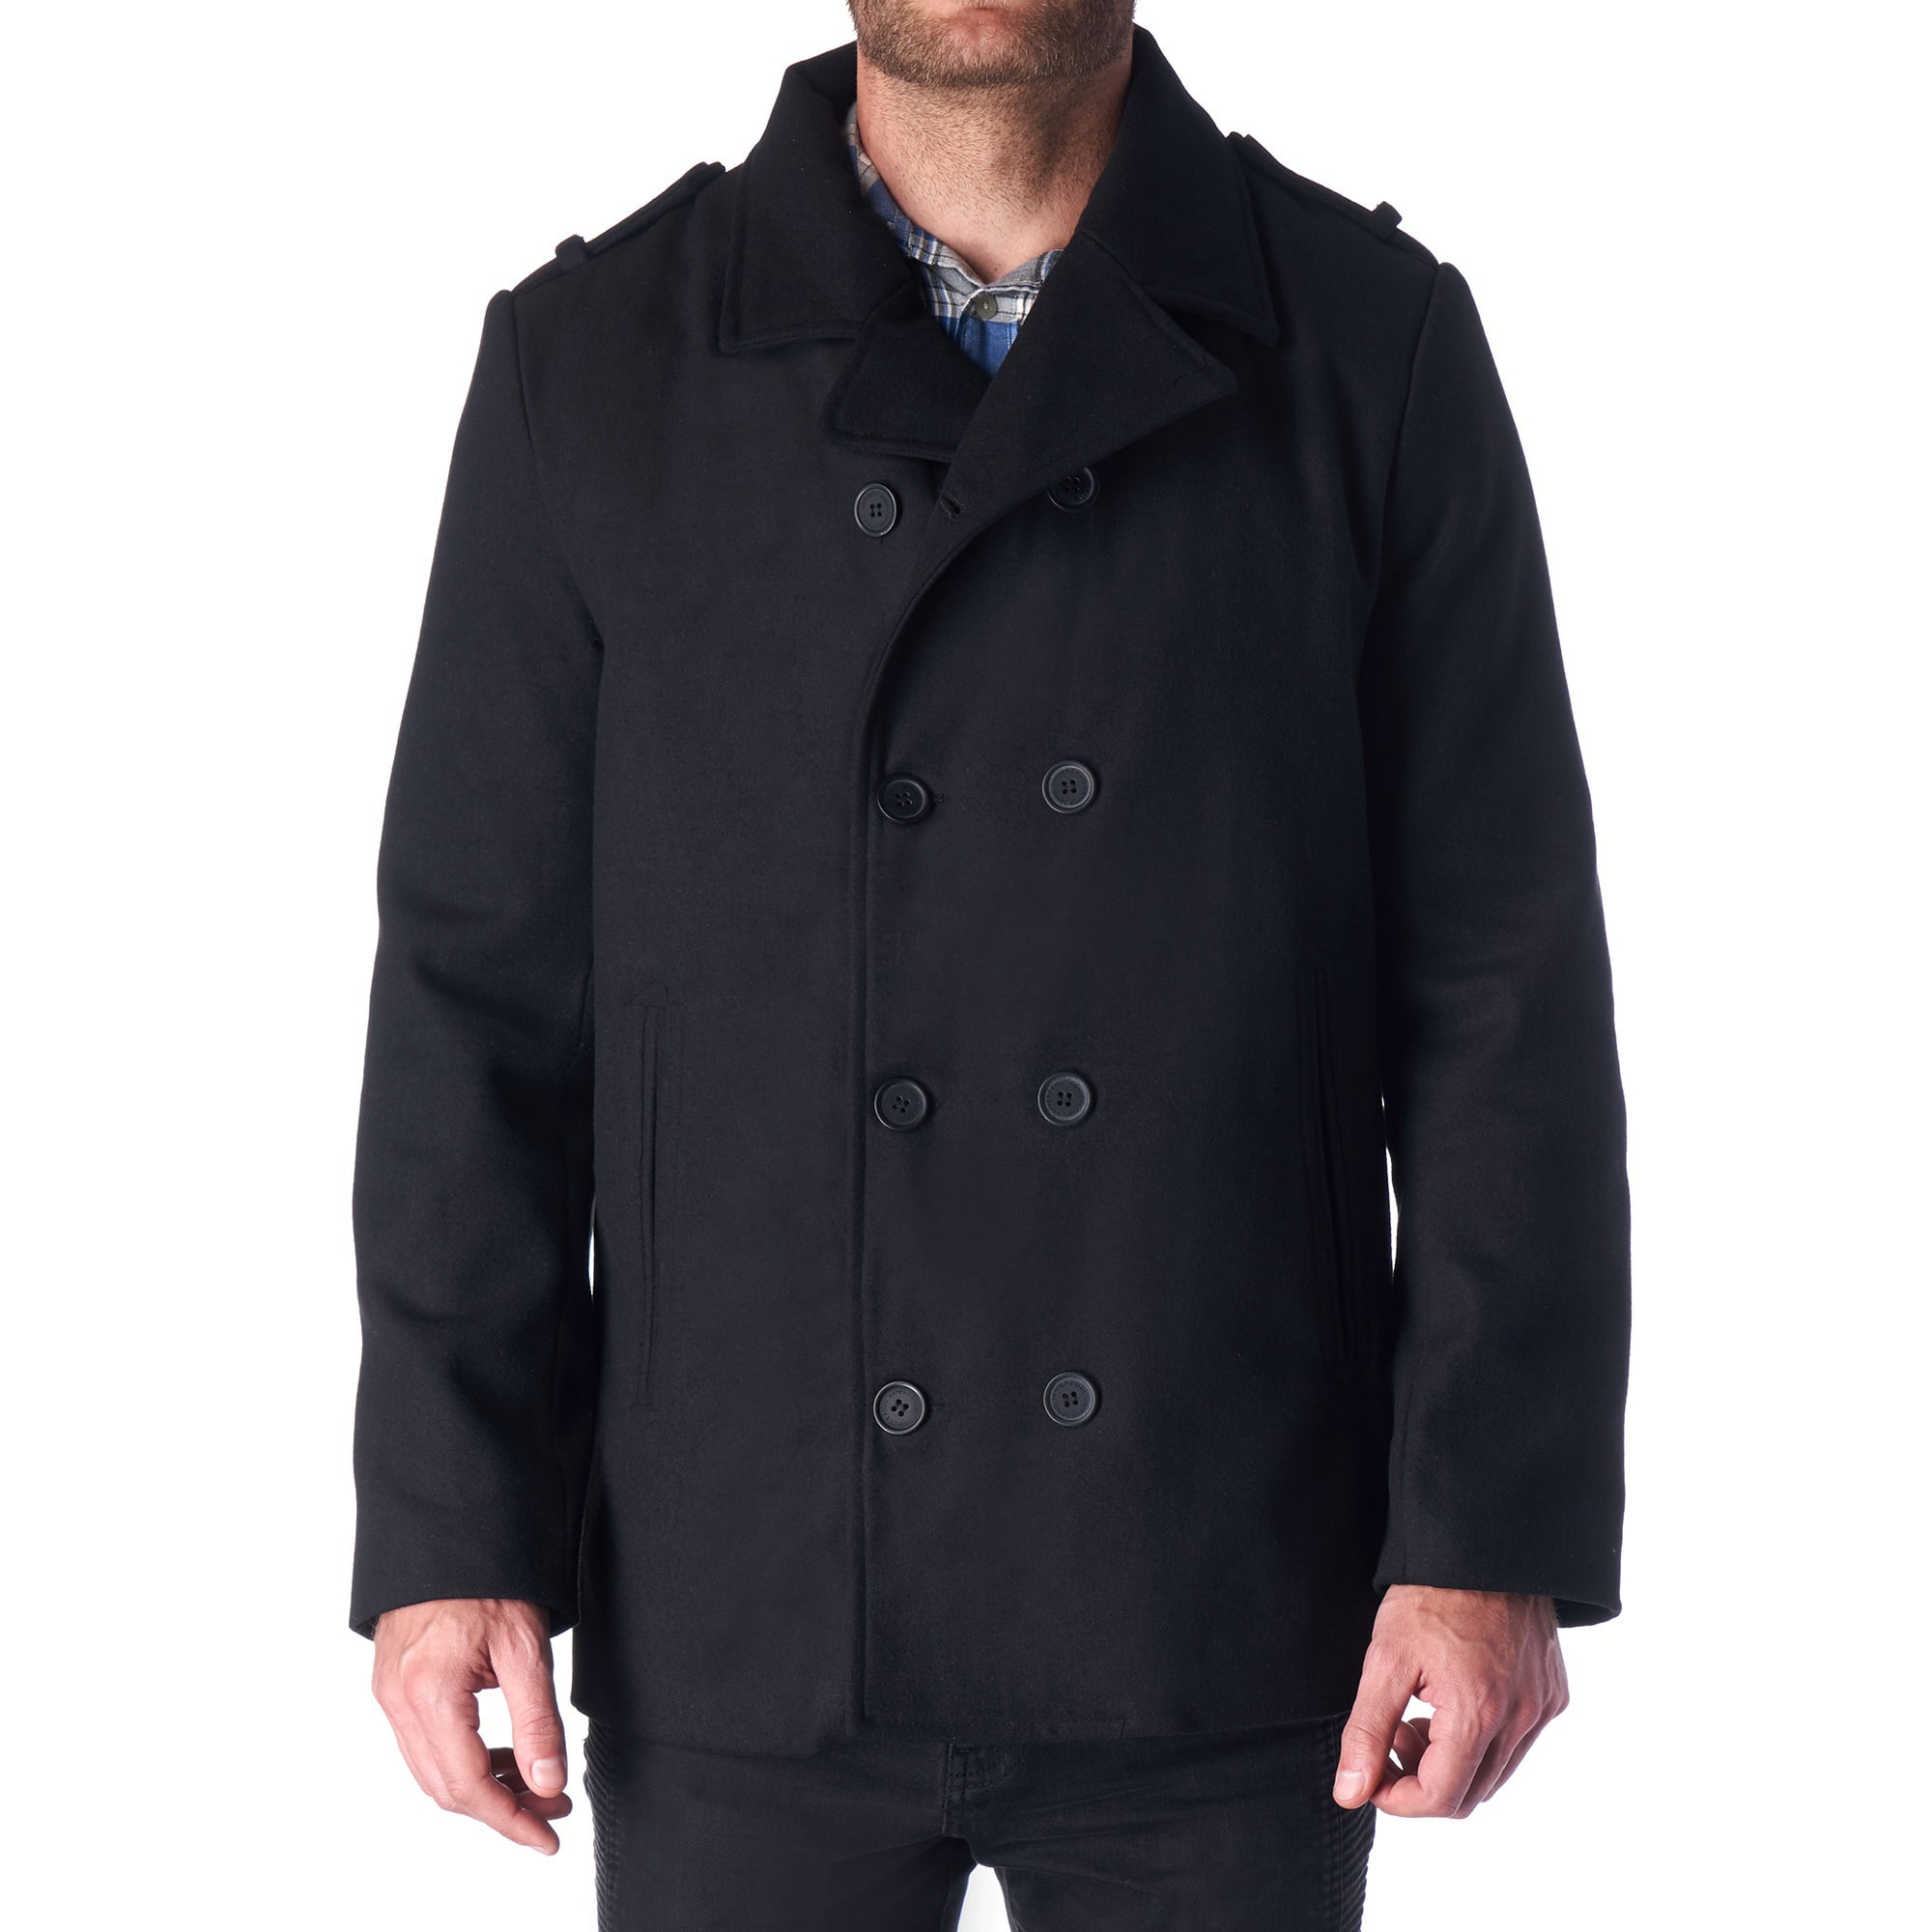 Hammer Anvil Bryce Mens Wool Blend Double Breasted Peacoat Dress Jacket ...